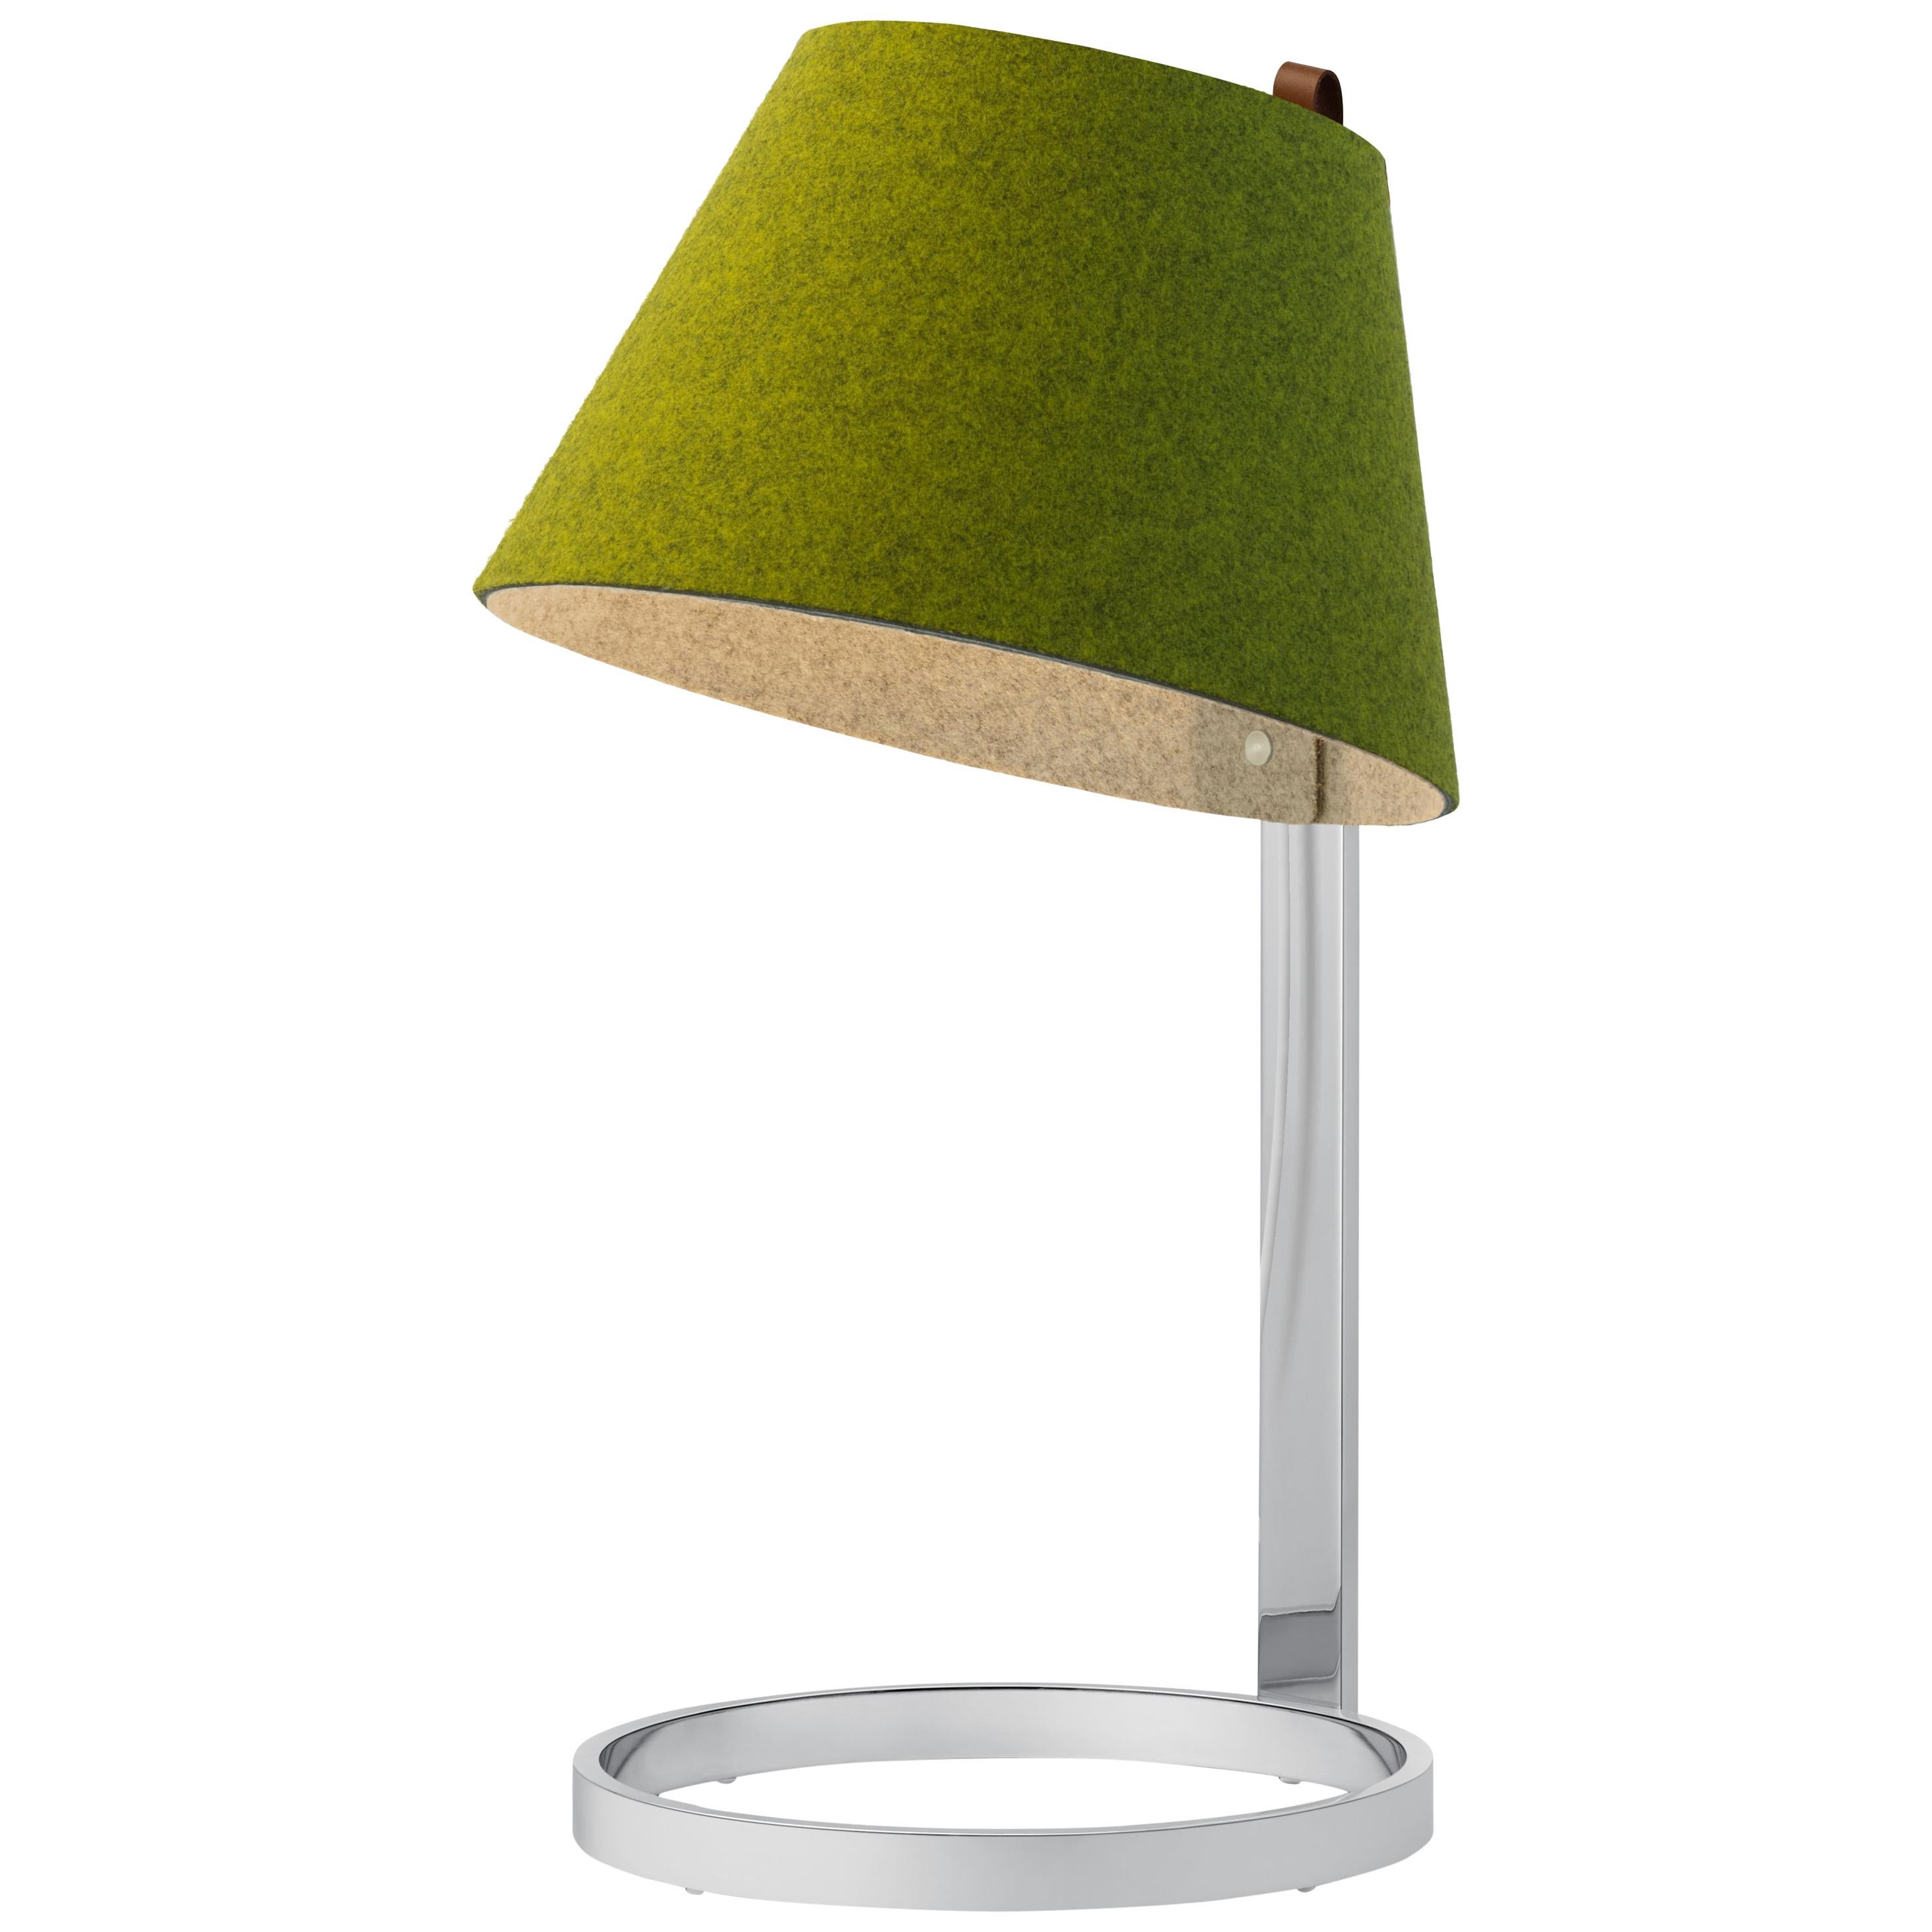 Lana Small Table Lamp in Moss and Grey with Chrome Base by Pablo Designs